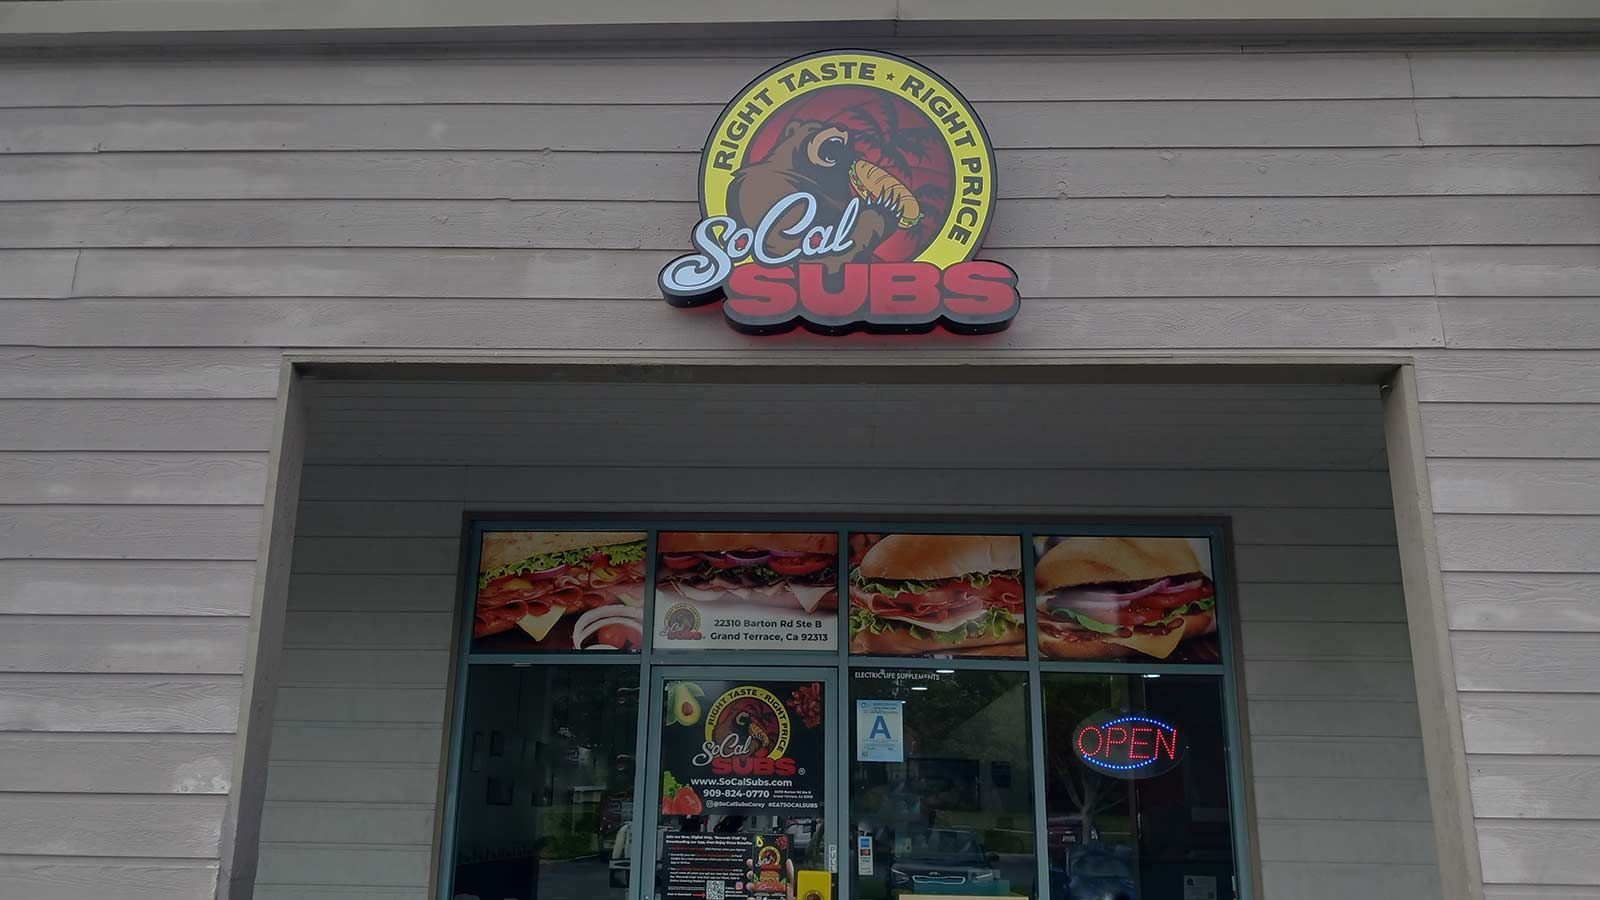 SoCal Subs light box sign installed at the storefront